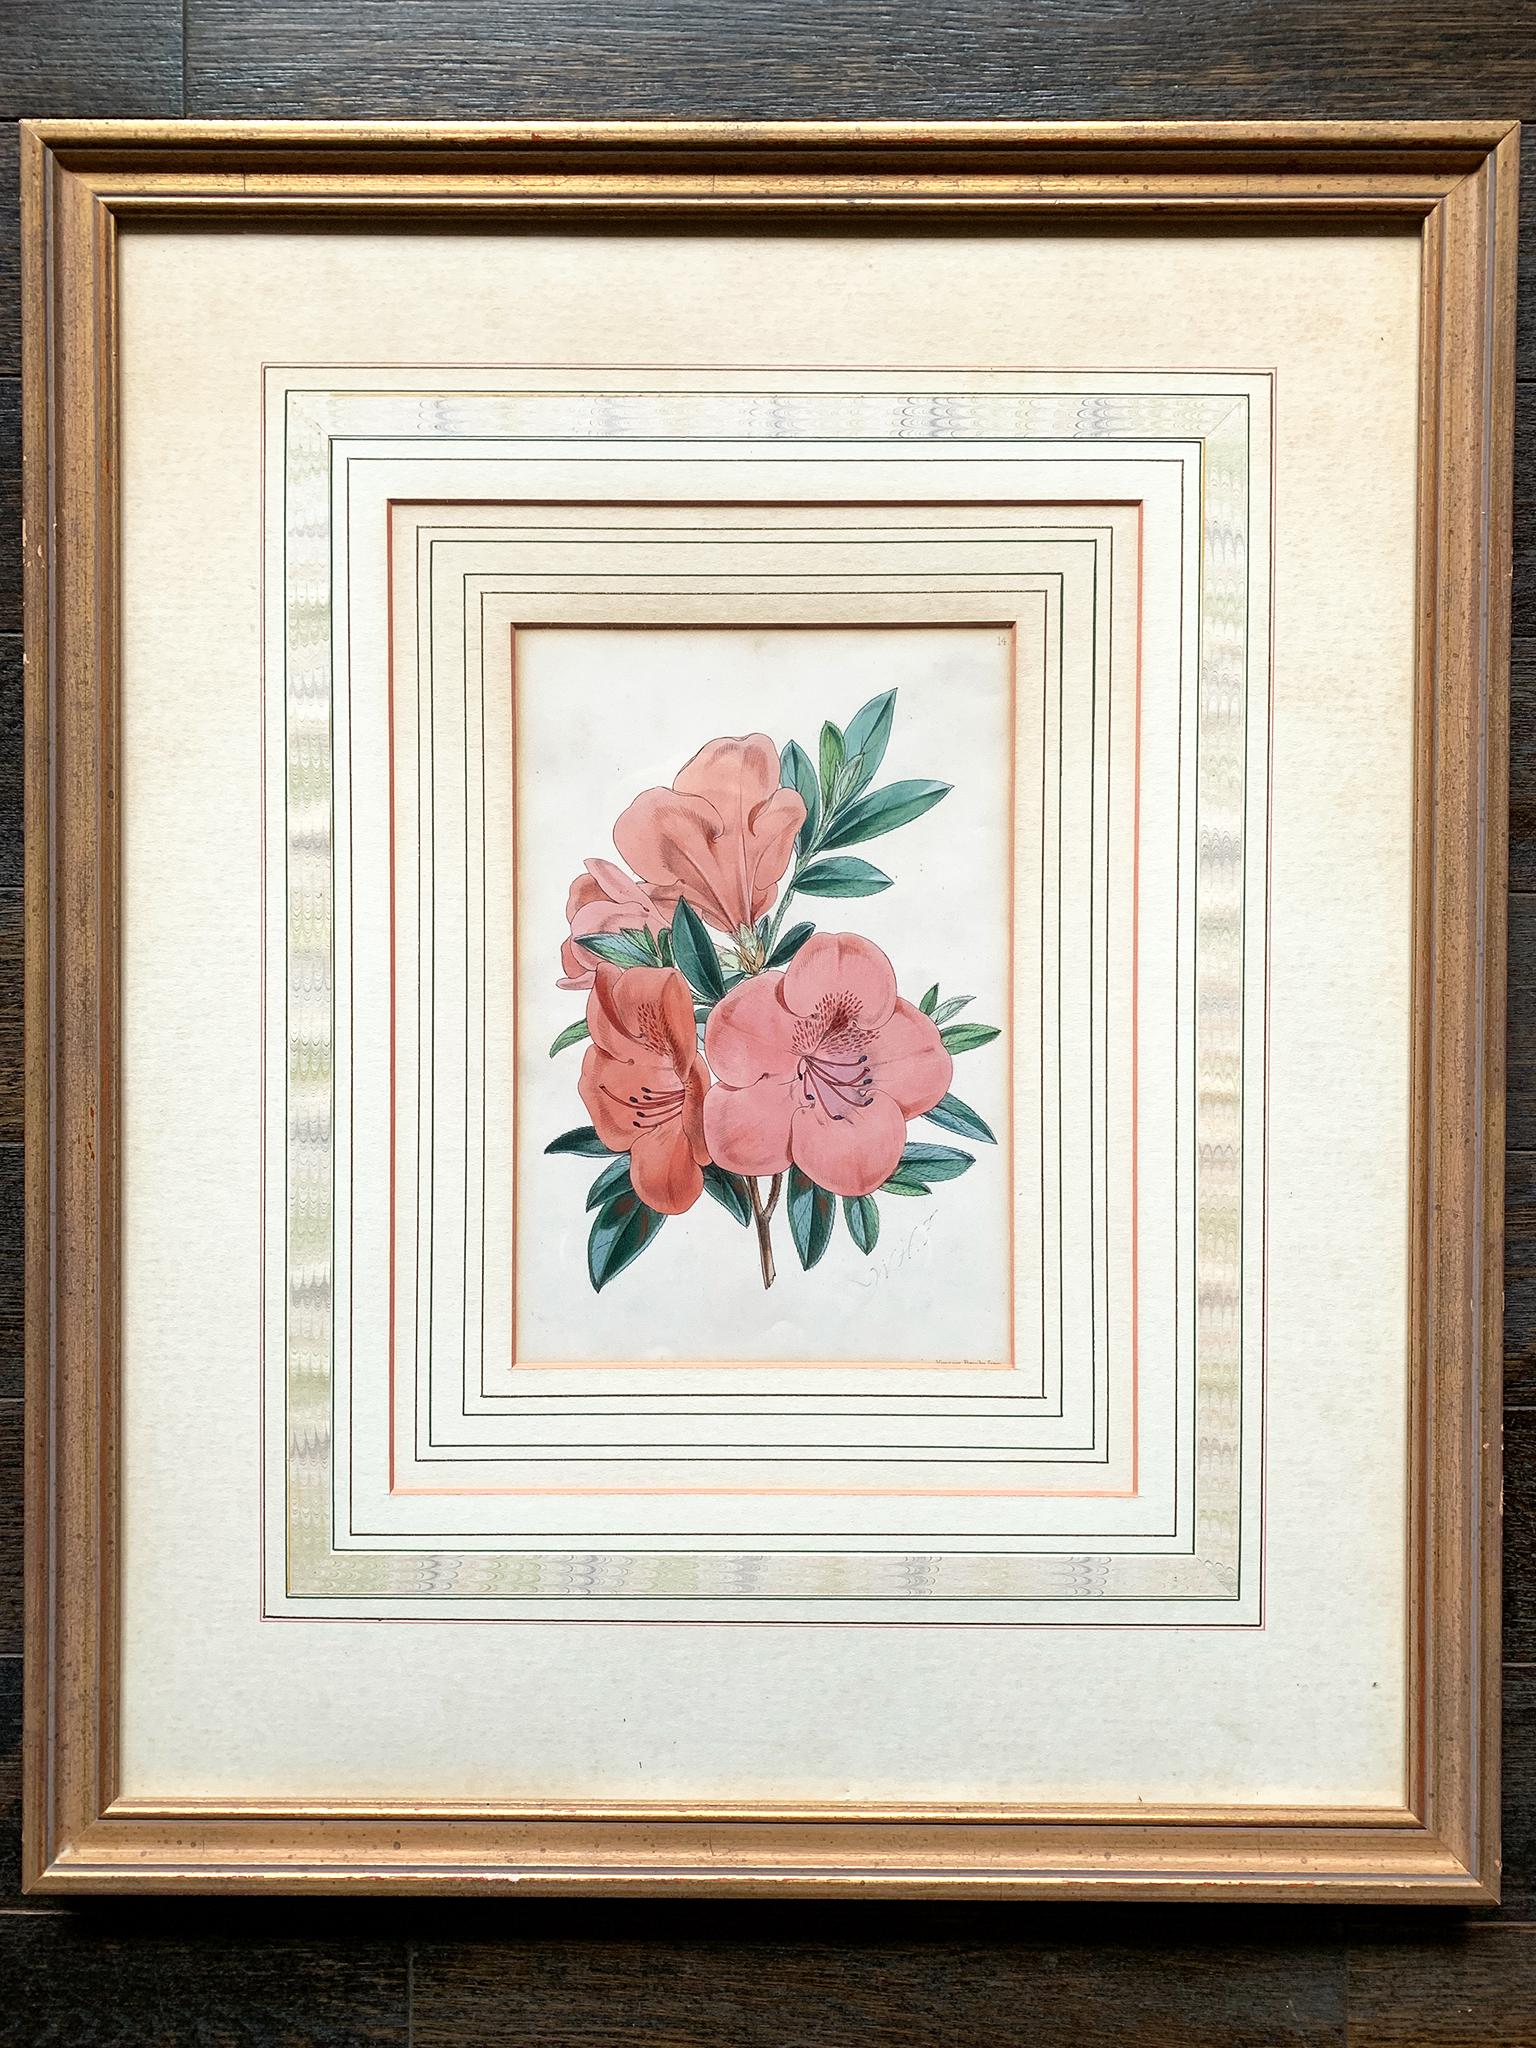 A pair of Late 19th Century botanical lithographs, printed by the British firm Vincent Brooks, Imp. Beautifully hand-colored. The prints come in giltwood frames with French matting and glass.

Frame dimensions:
18 in. width
22 in. height
1 in.